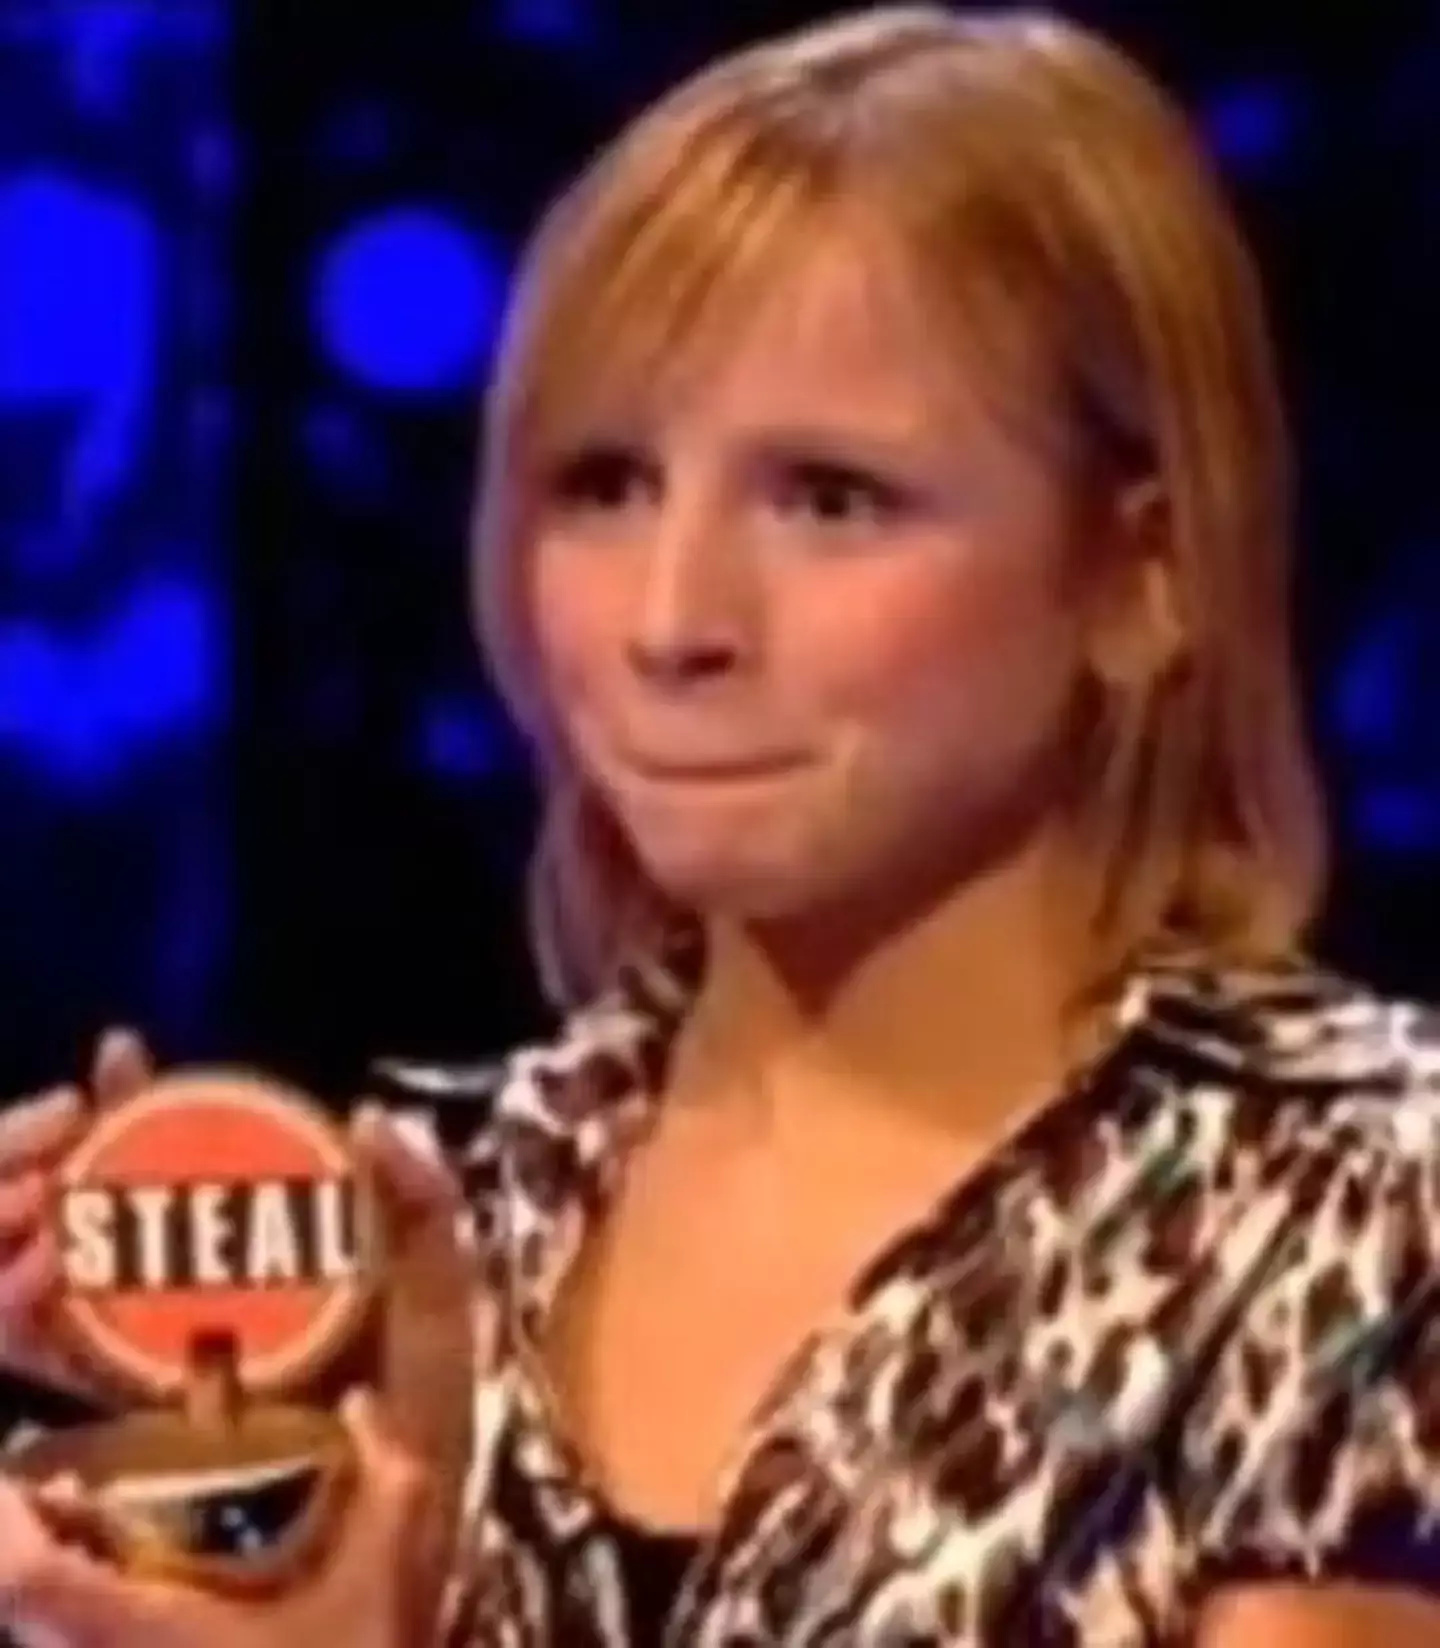 Sarah stole £100,000 from fellow contestant, Stephen.